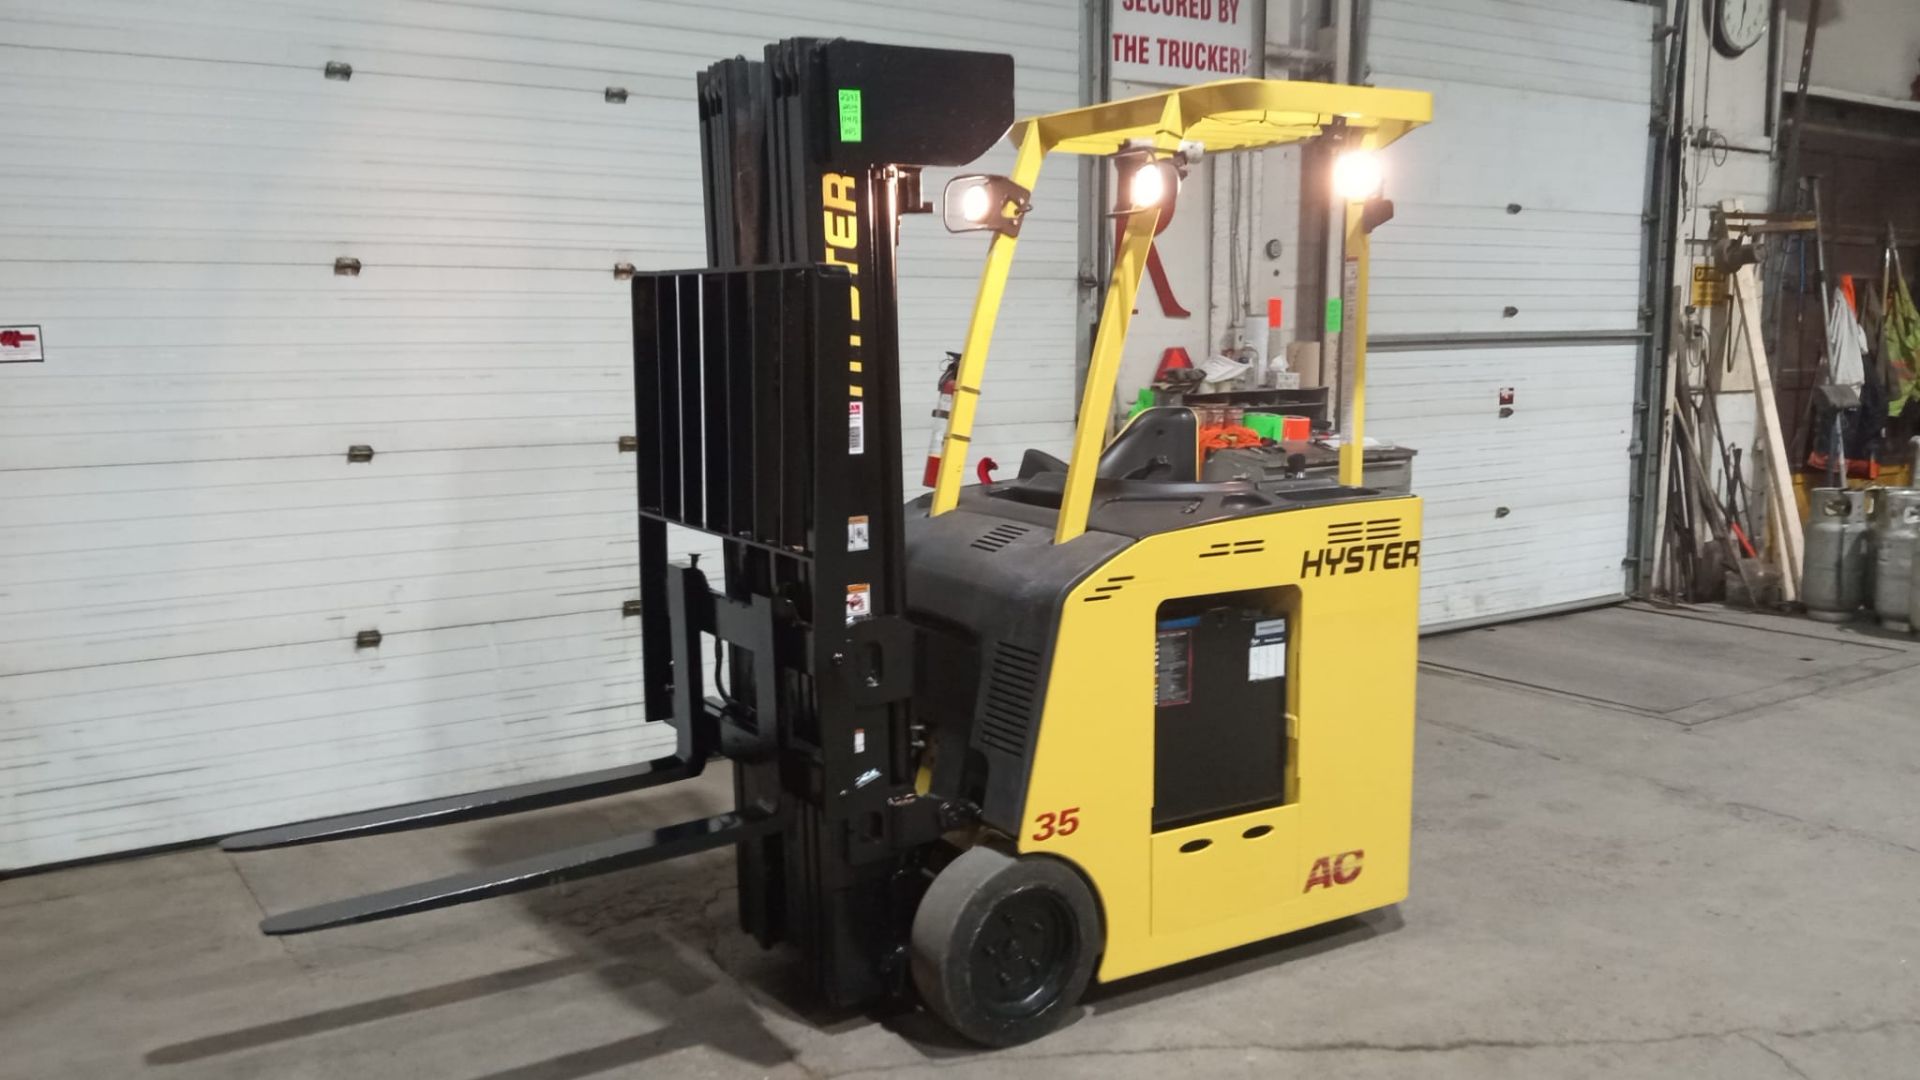 2014 Hyster 3,500lbs Capacity Electric Stand On Forklift 4-STAGE MAST 36V with sideshift - FREE - Image 3 of 6